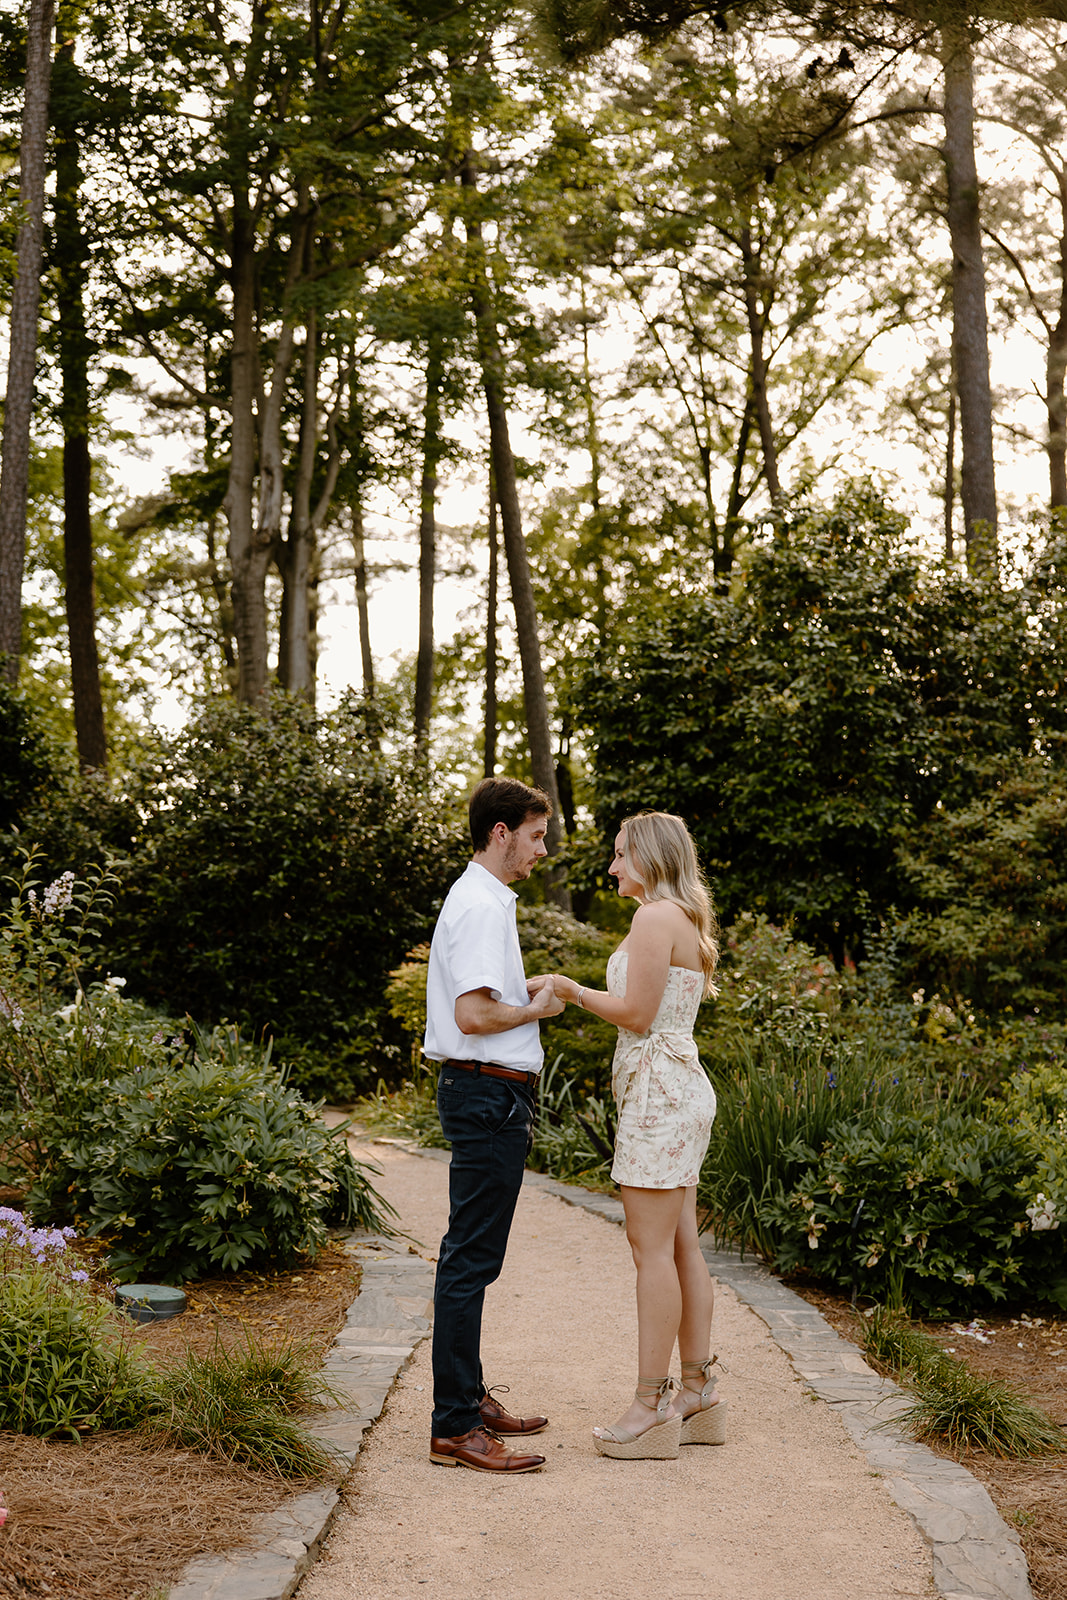 raleigh proposal locations raleigh proposal photographer raleigh egagement photographer proposal session garden proposal